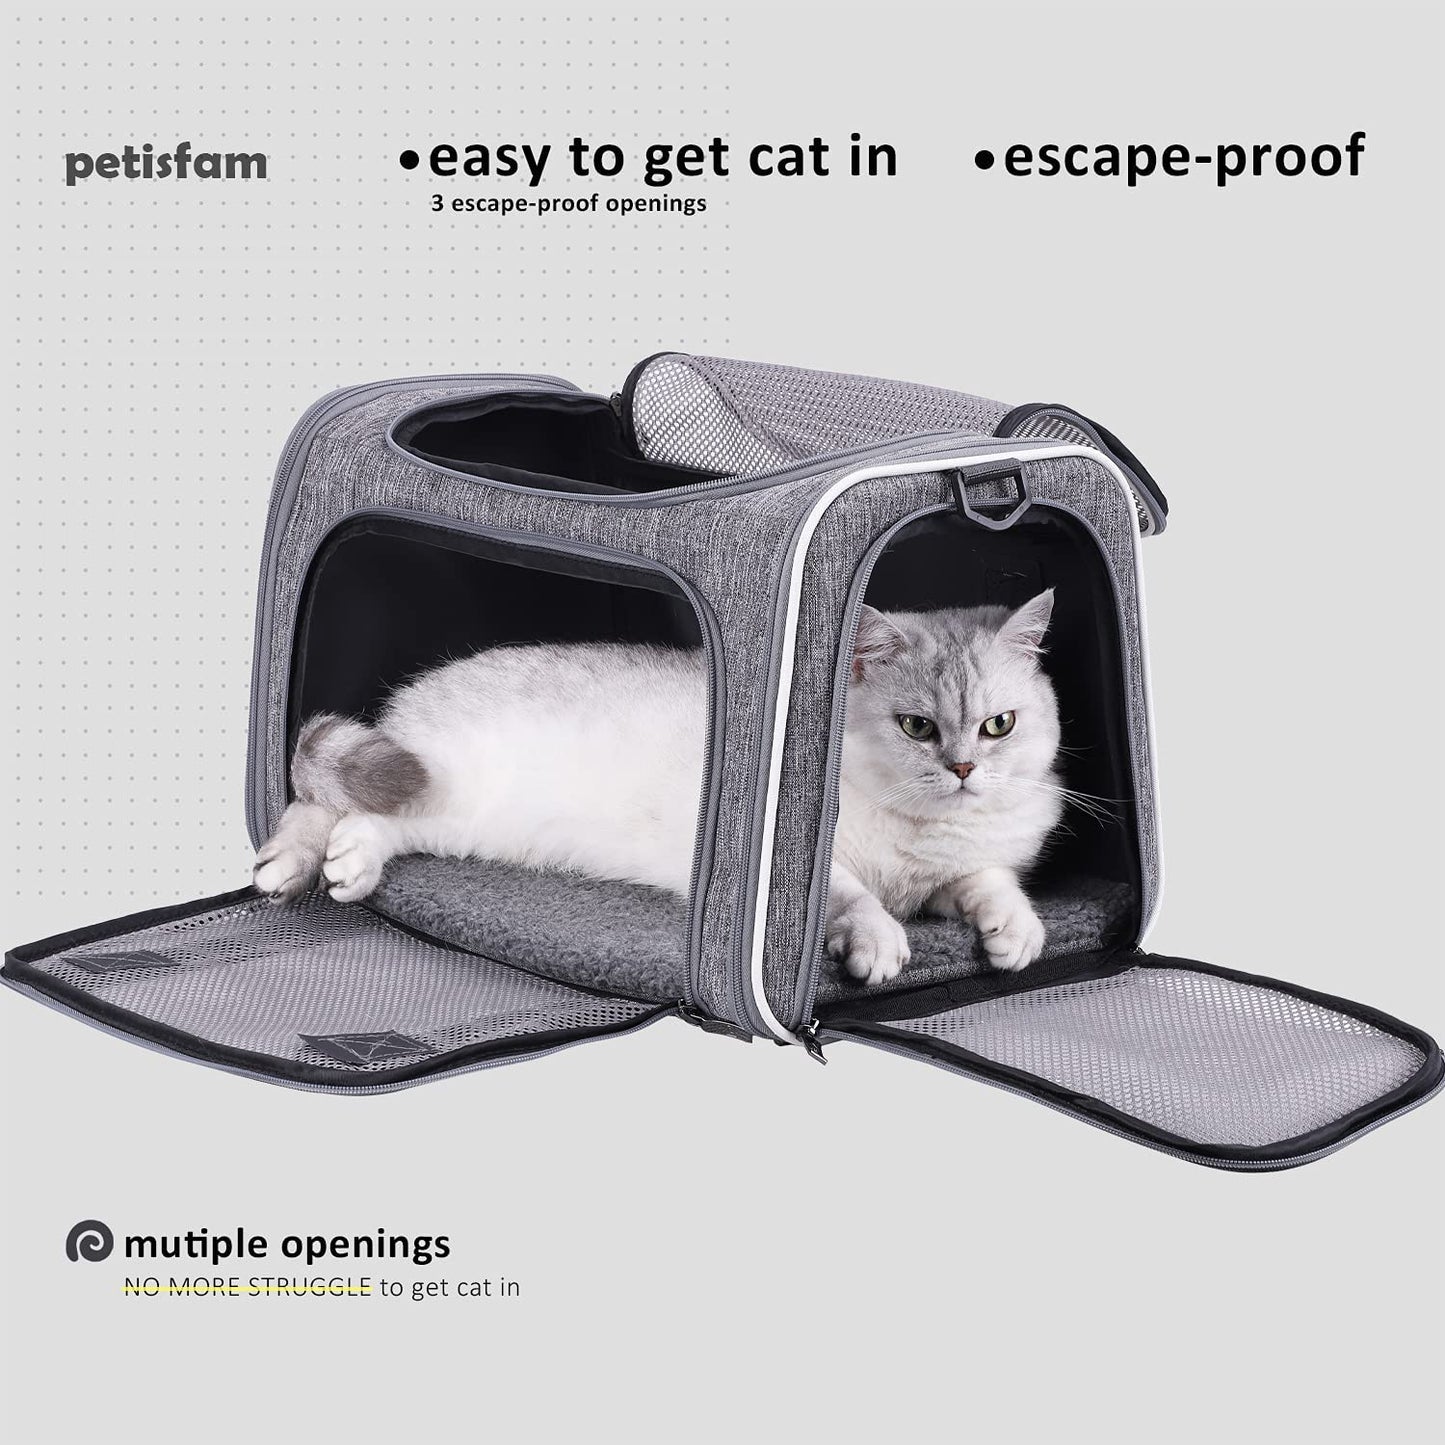 Top Load Cat Carrier Bag for Medium Cats and Small Dogs. Airline Approved, Collapsible, Escape Proof and Auto-Safe. Easy to Get Cat in and Make Vet Visit Less Stressful